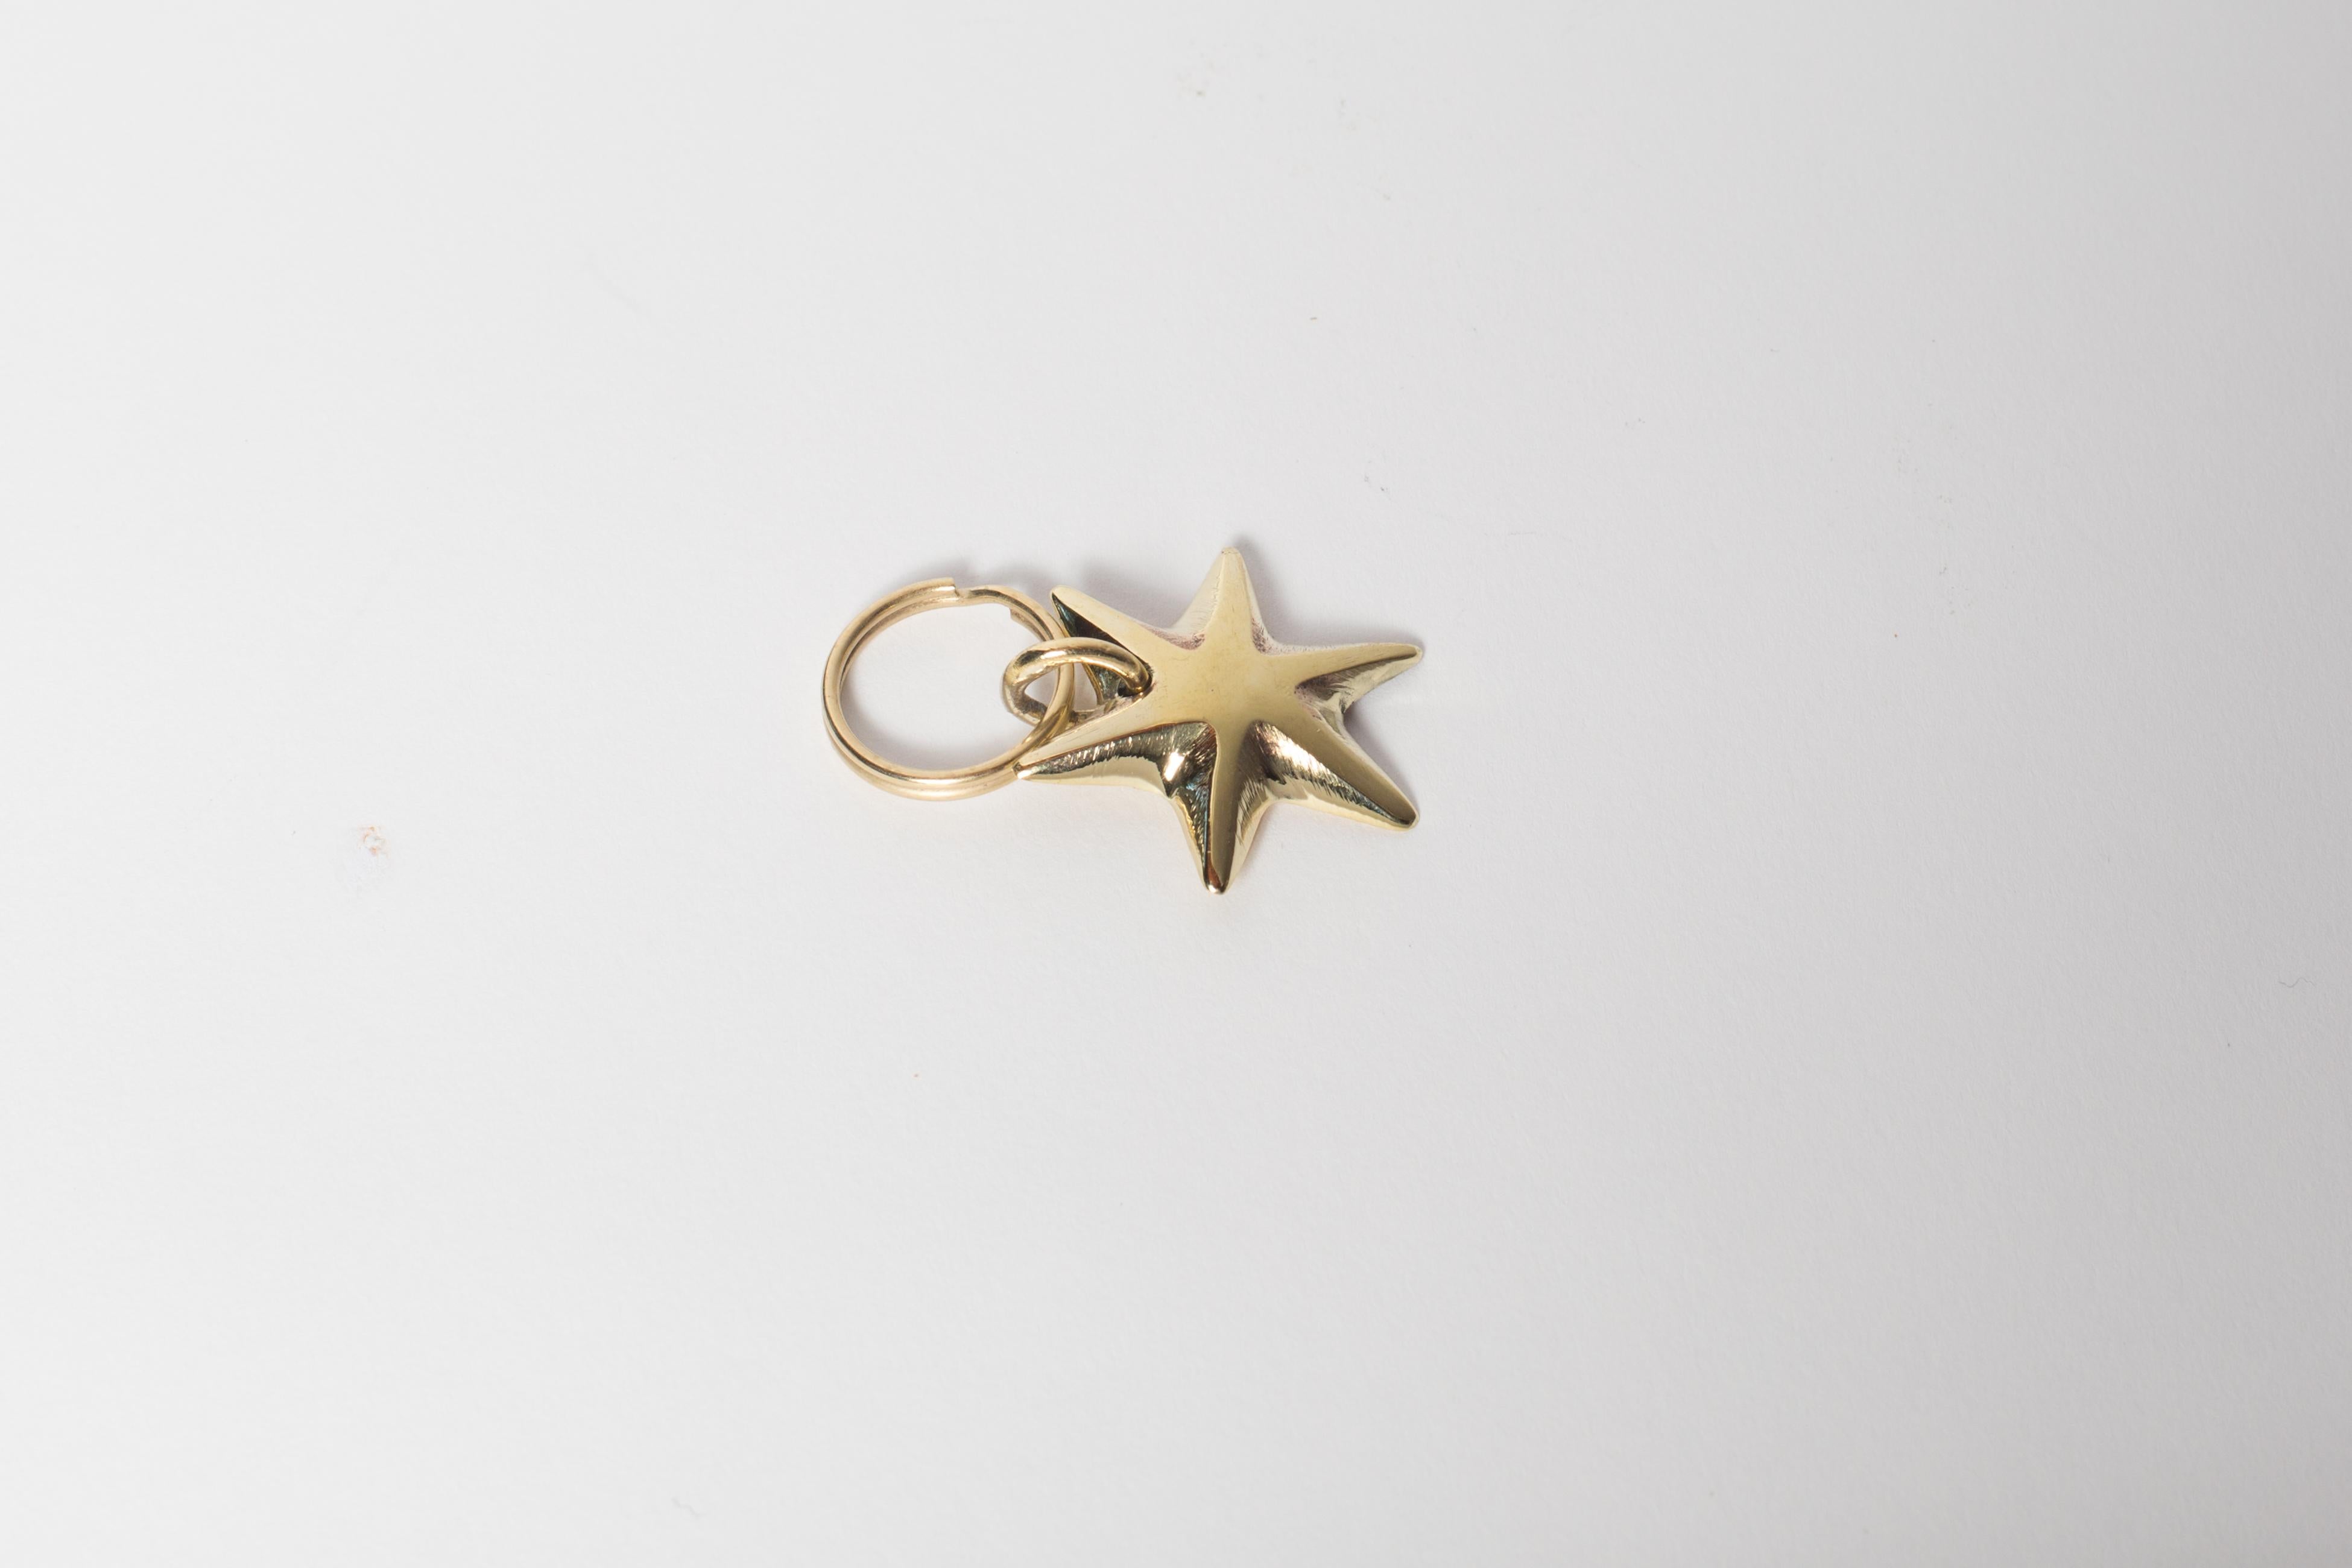 Contemporary Carl Auböck Model #5615 'Star' Solid Brass Keyring with Signature For Sale